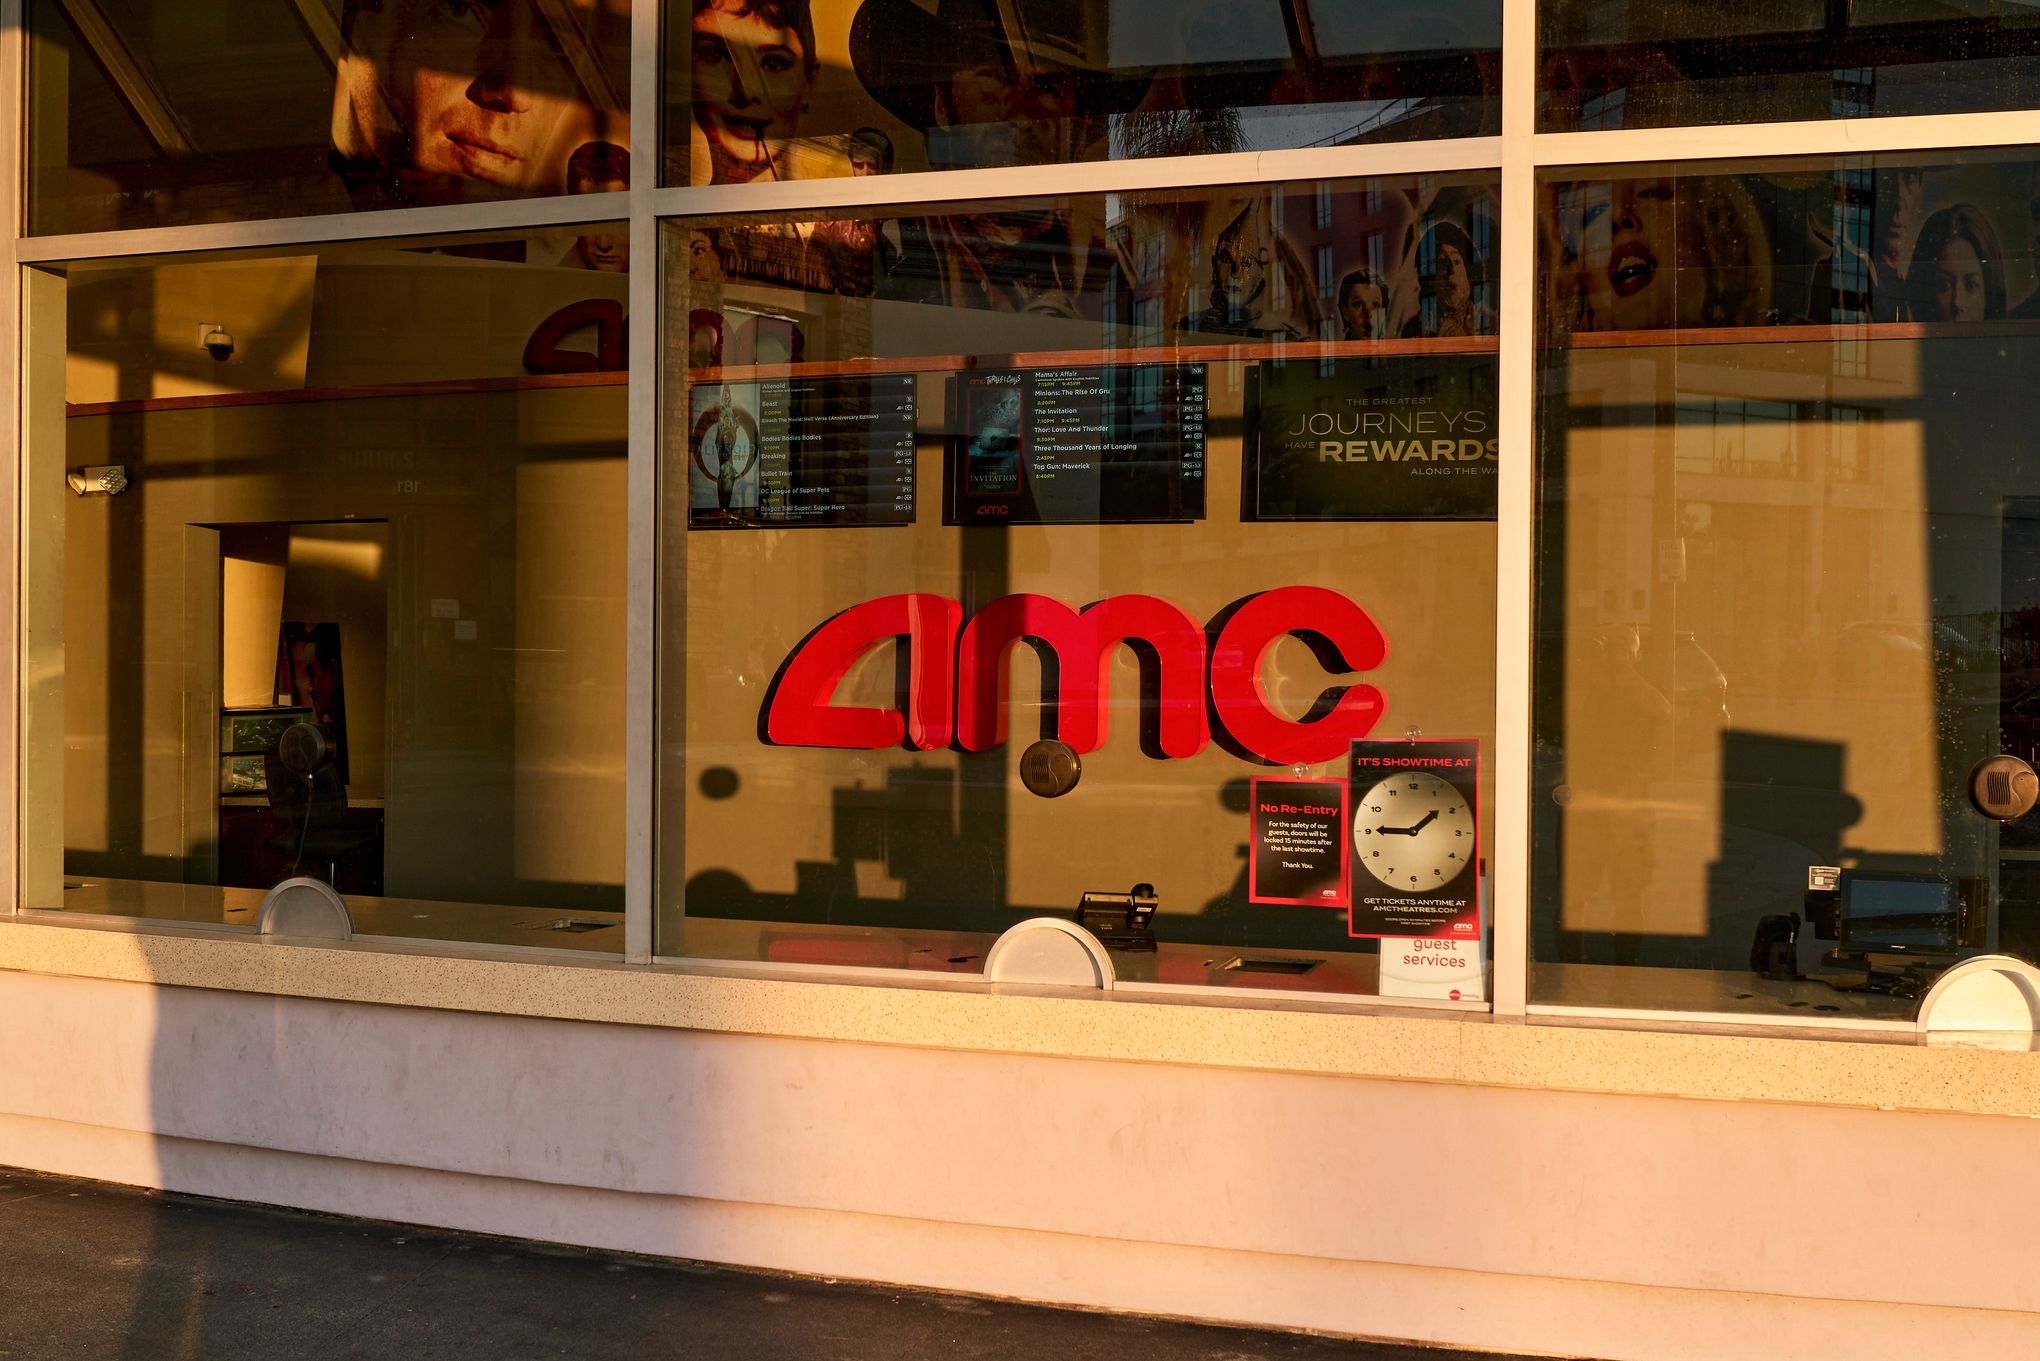 AMC Movie Chain Will Charge More For Better Seats, But Not For